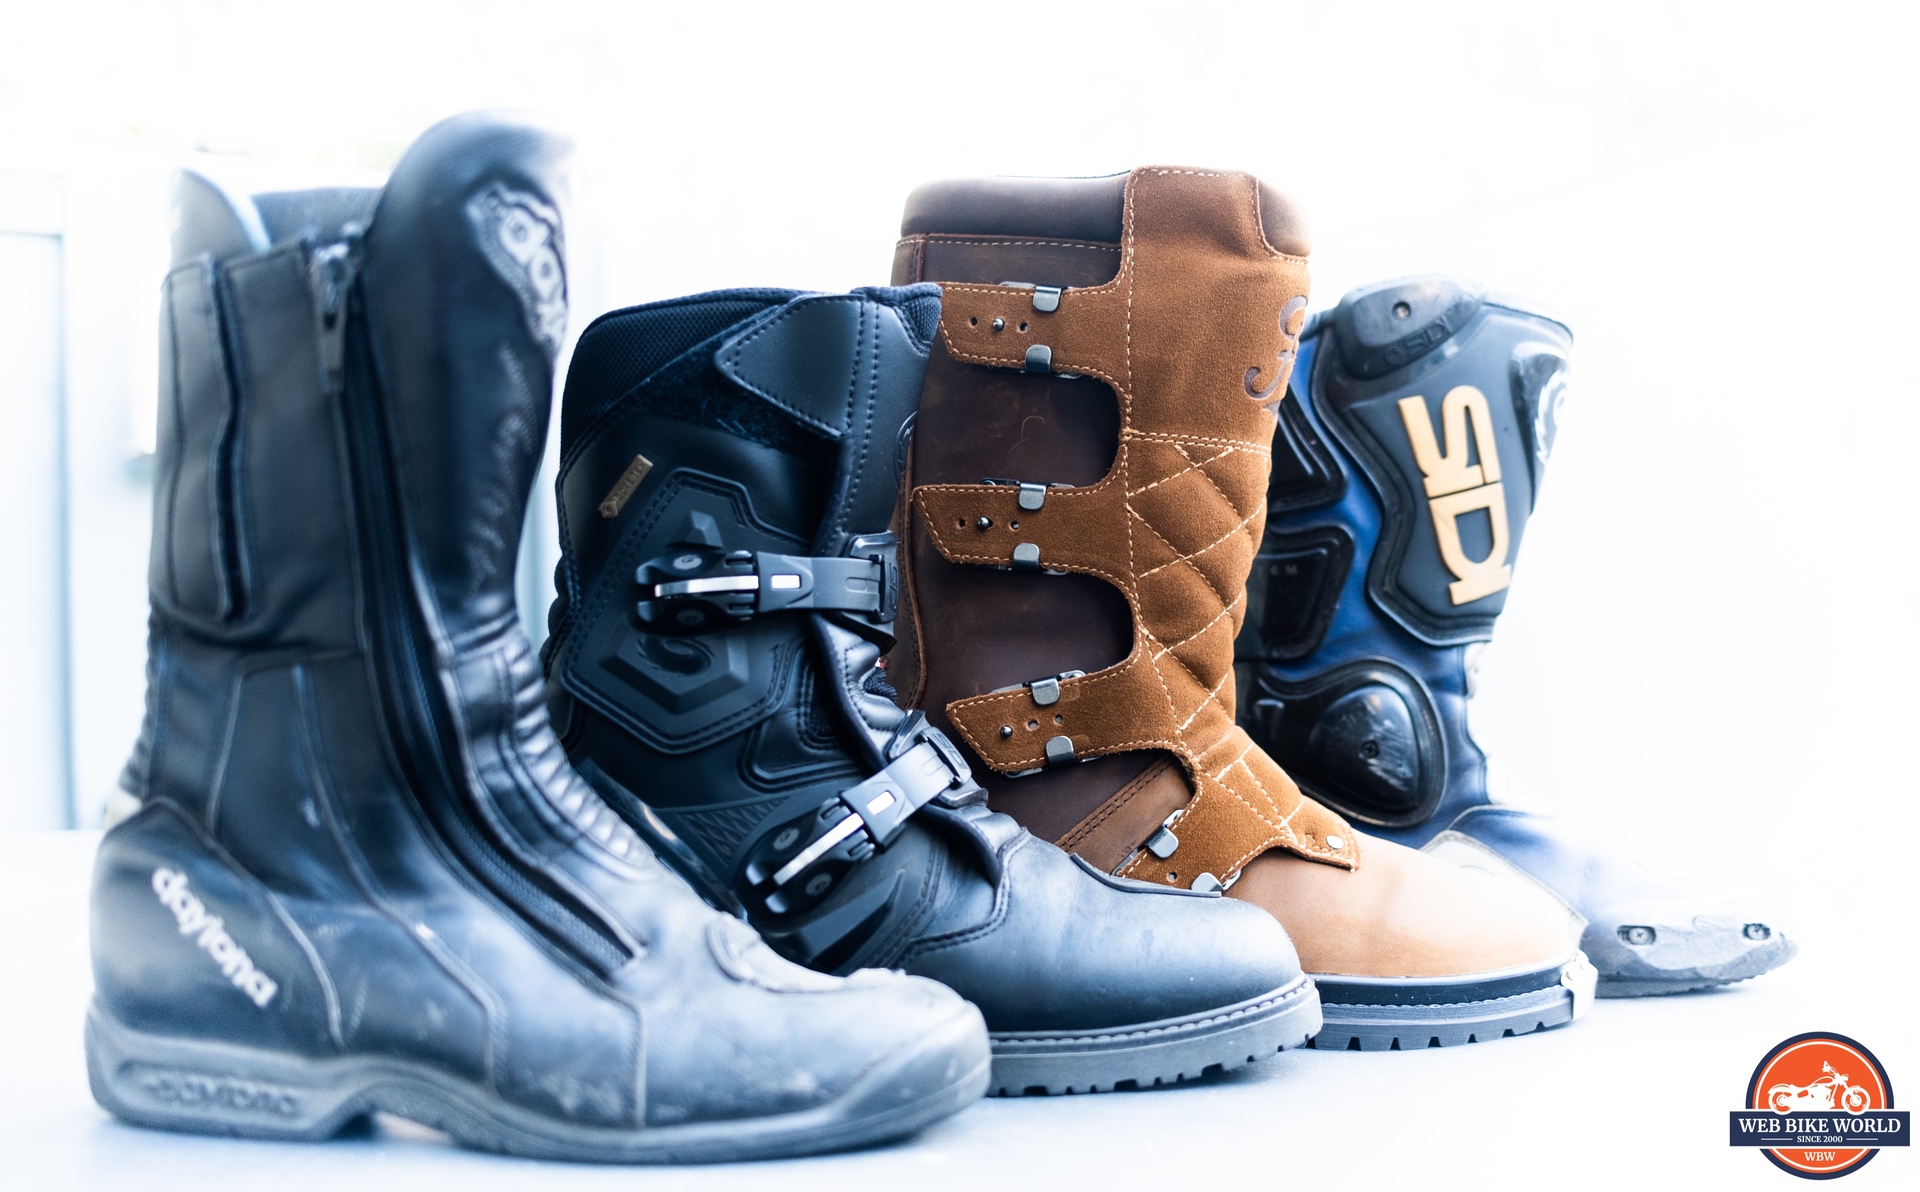 Side view of four different motorcycle boots including a Fuel Dust Devil Boot